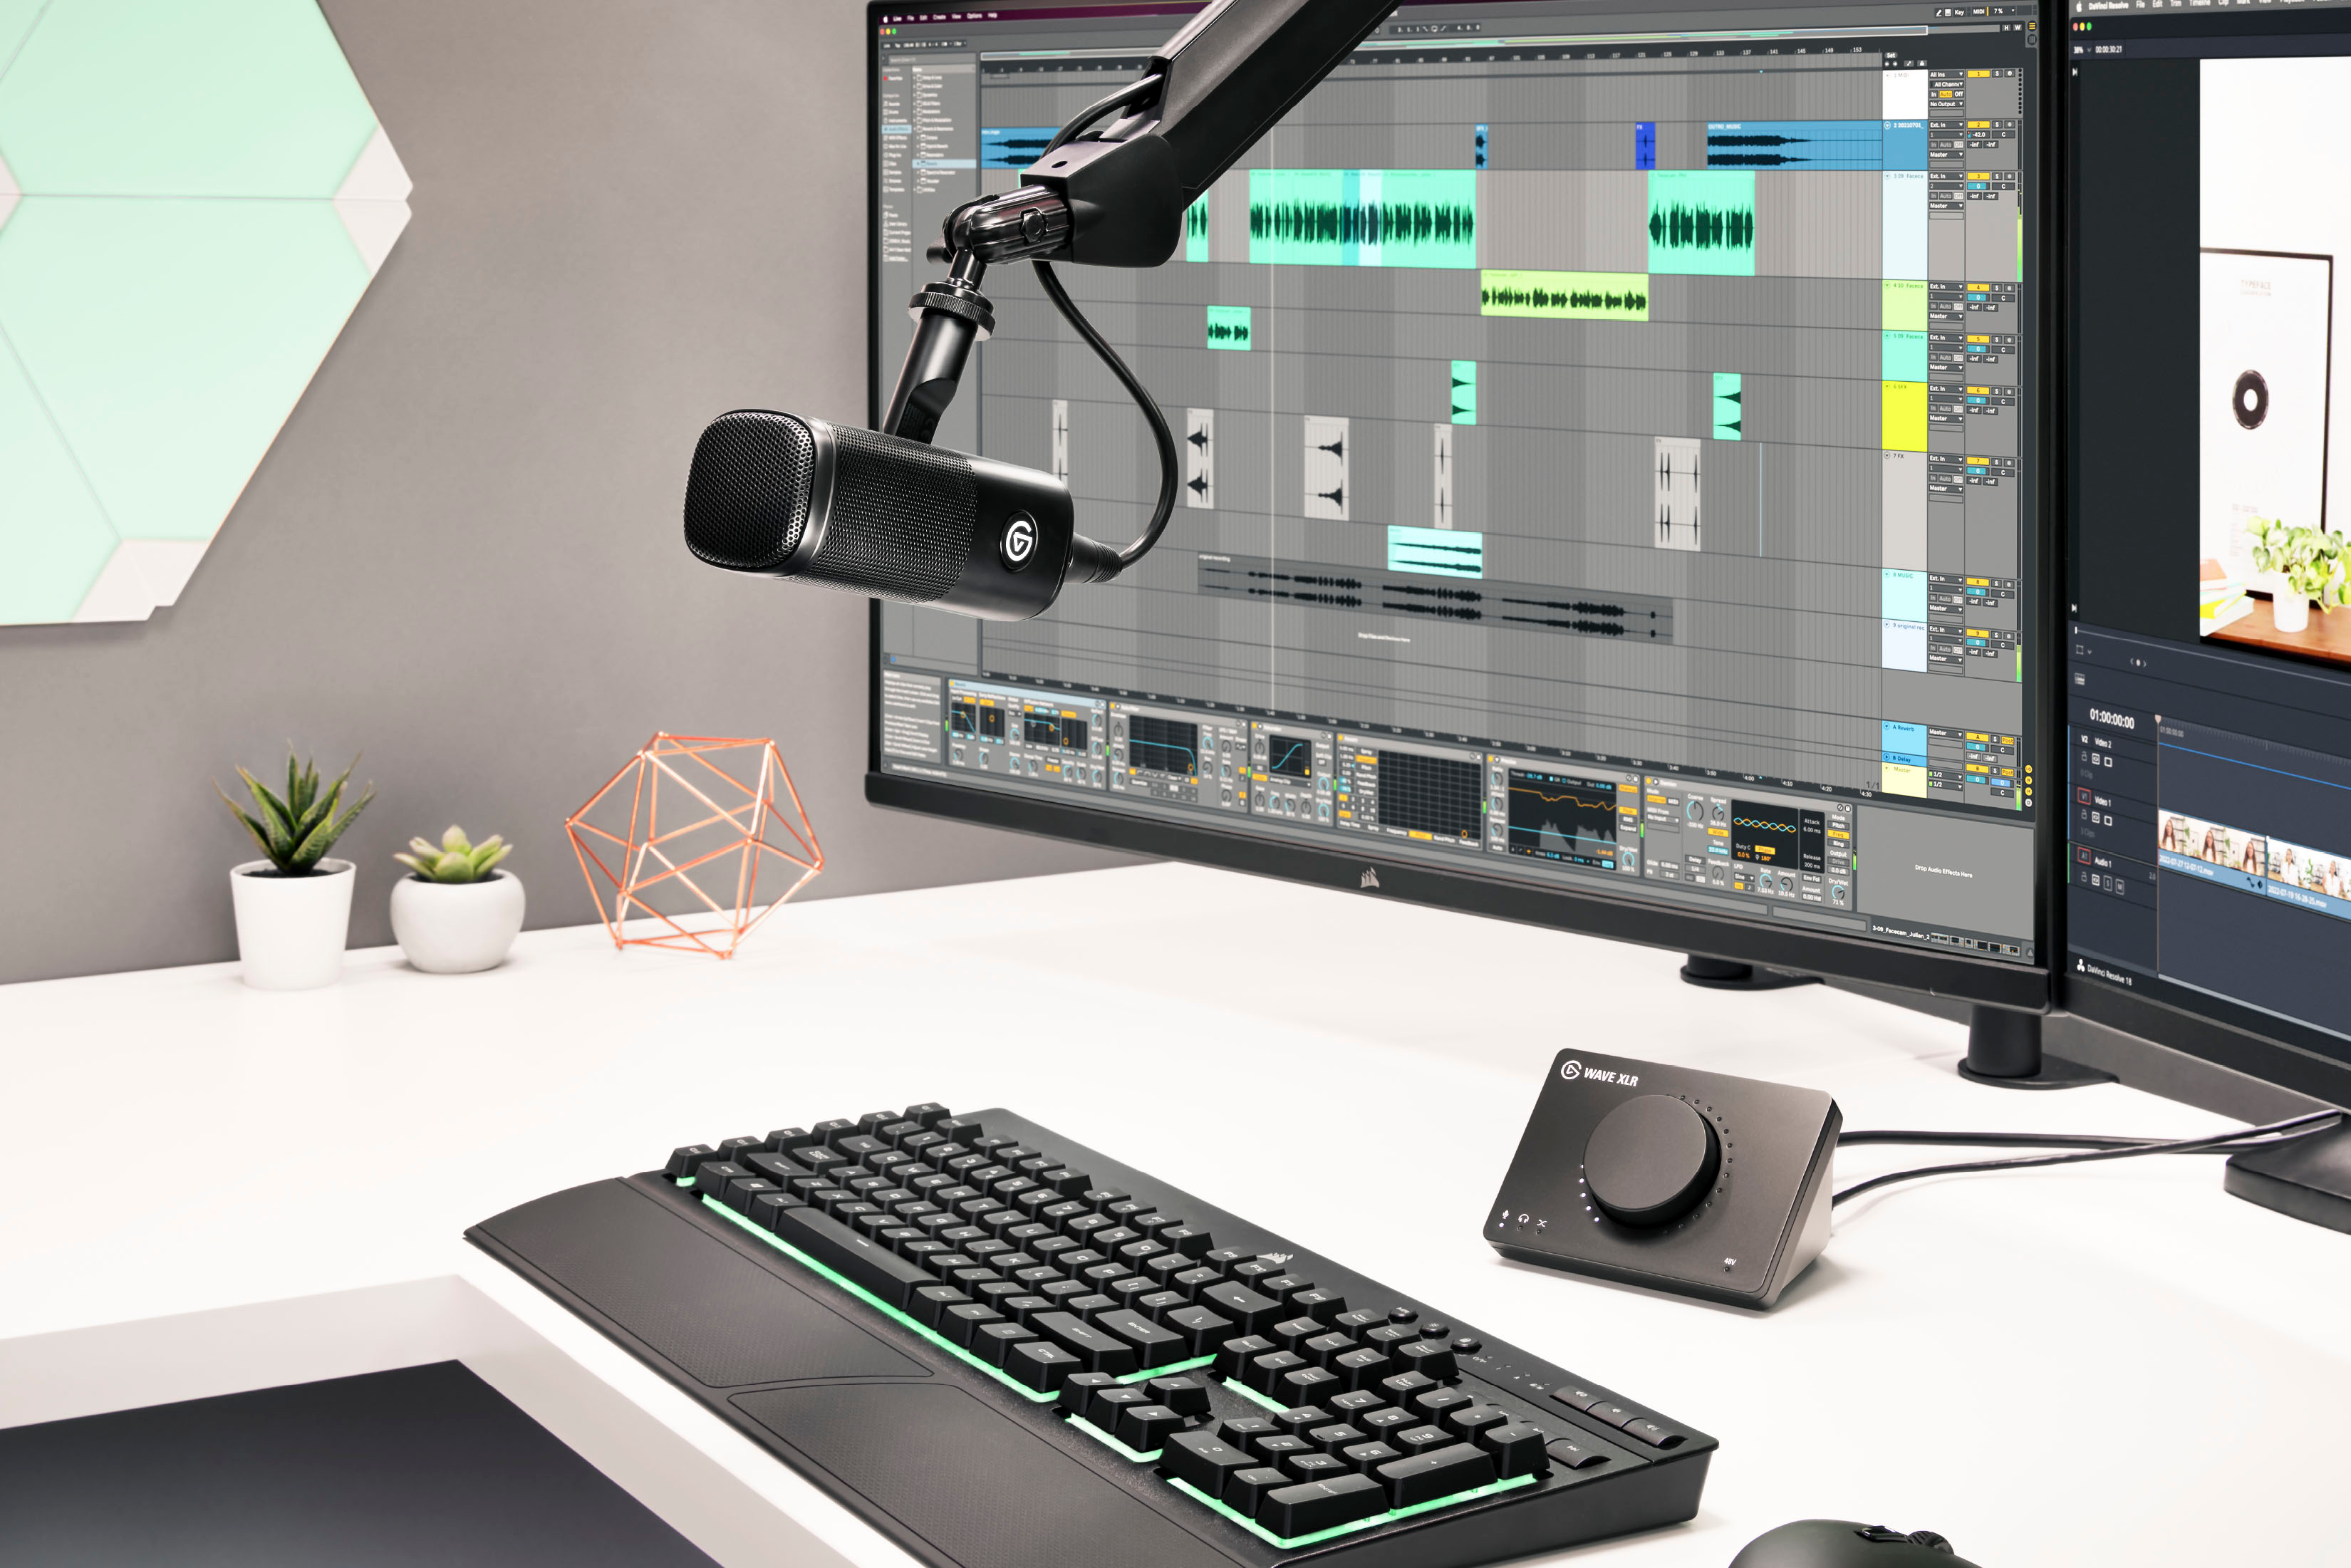  Elgato Wave DX with Cable - Dynamic XLR Microphone with 10ft/3m  XLR Cable, Speech optimised for Podcasting, Streaming, Broadcasting, No  Signal Booster Required, Works with Any Interface, PC/Mac : Musical  Instruments